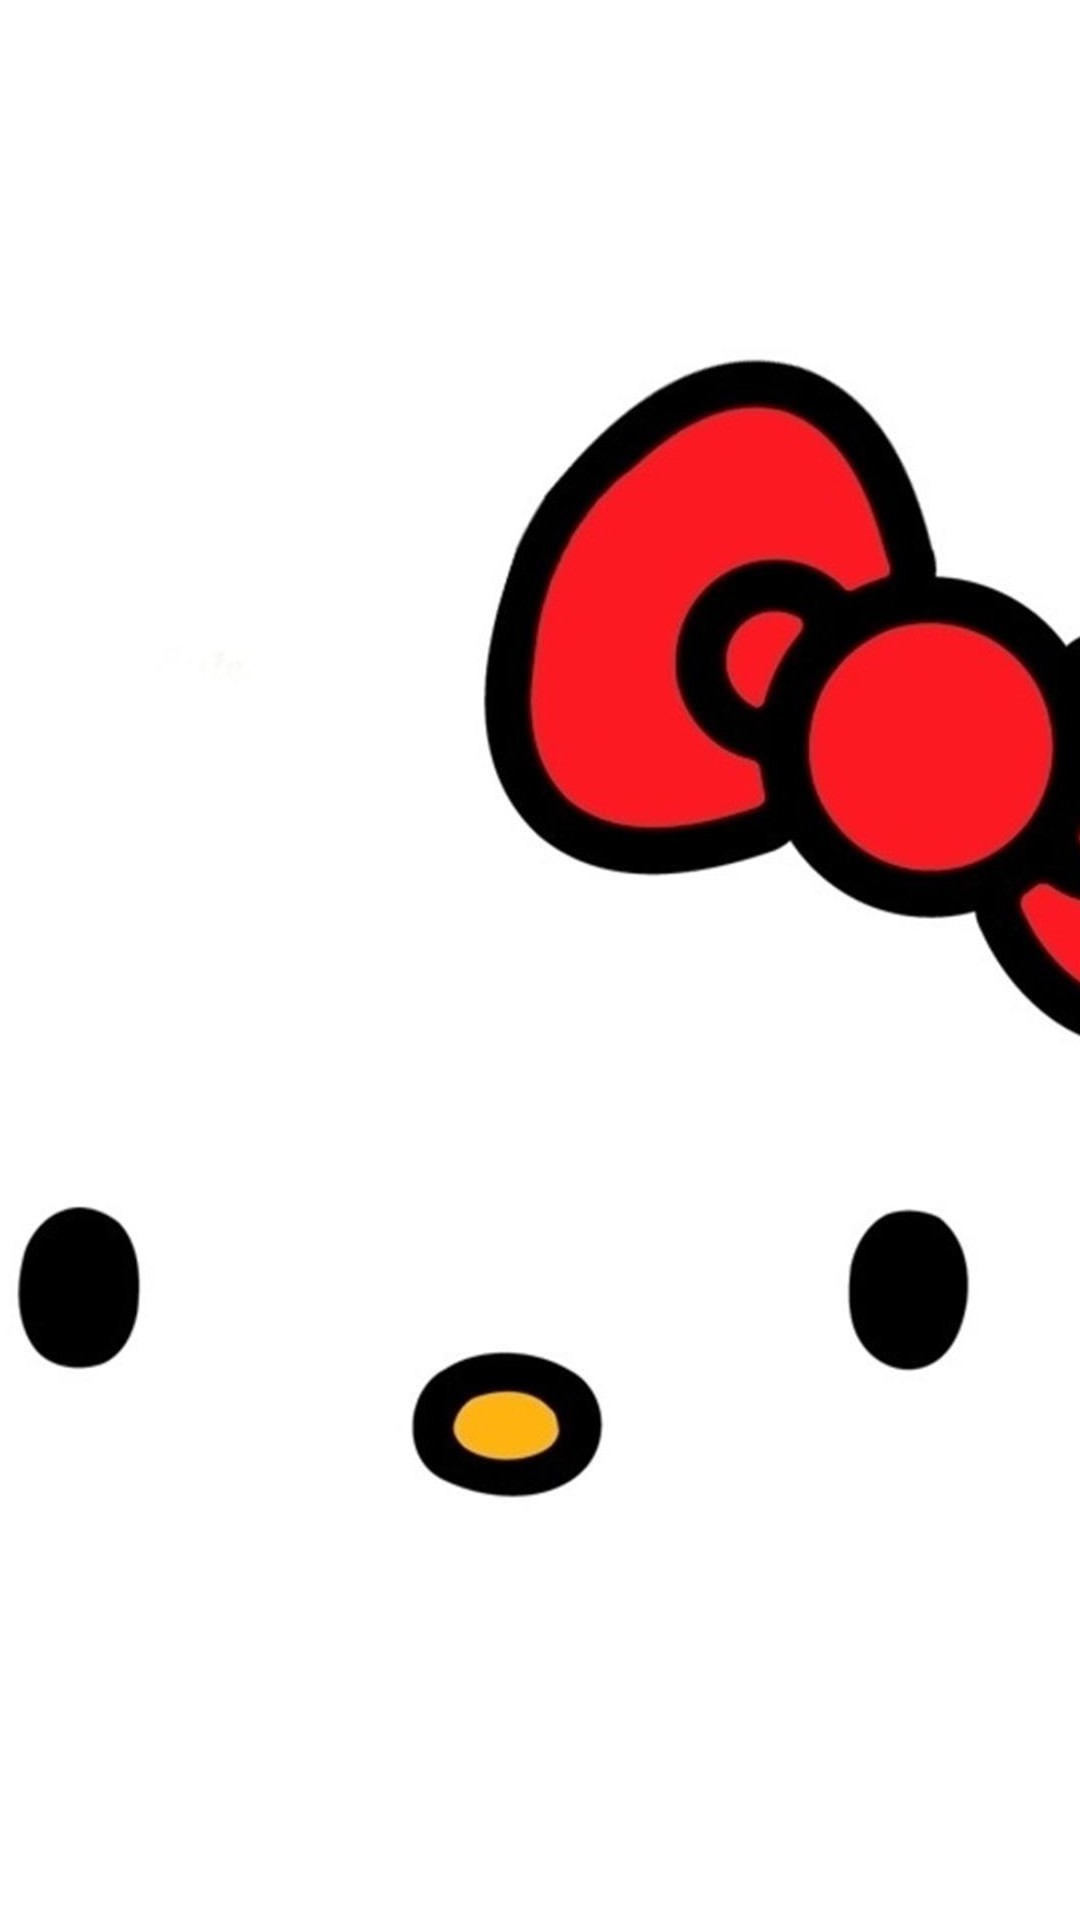 1080x1920 Girlish Hello Kitty White Minimal Japan Cat. Girly Wallpapers For  IphoneWallpapers ...